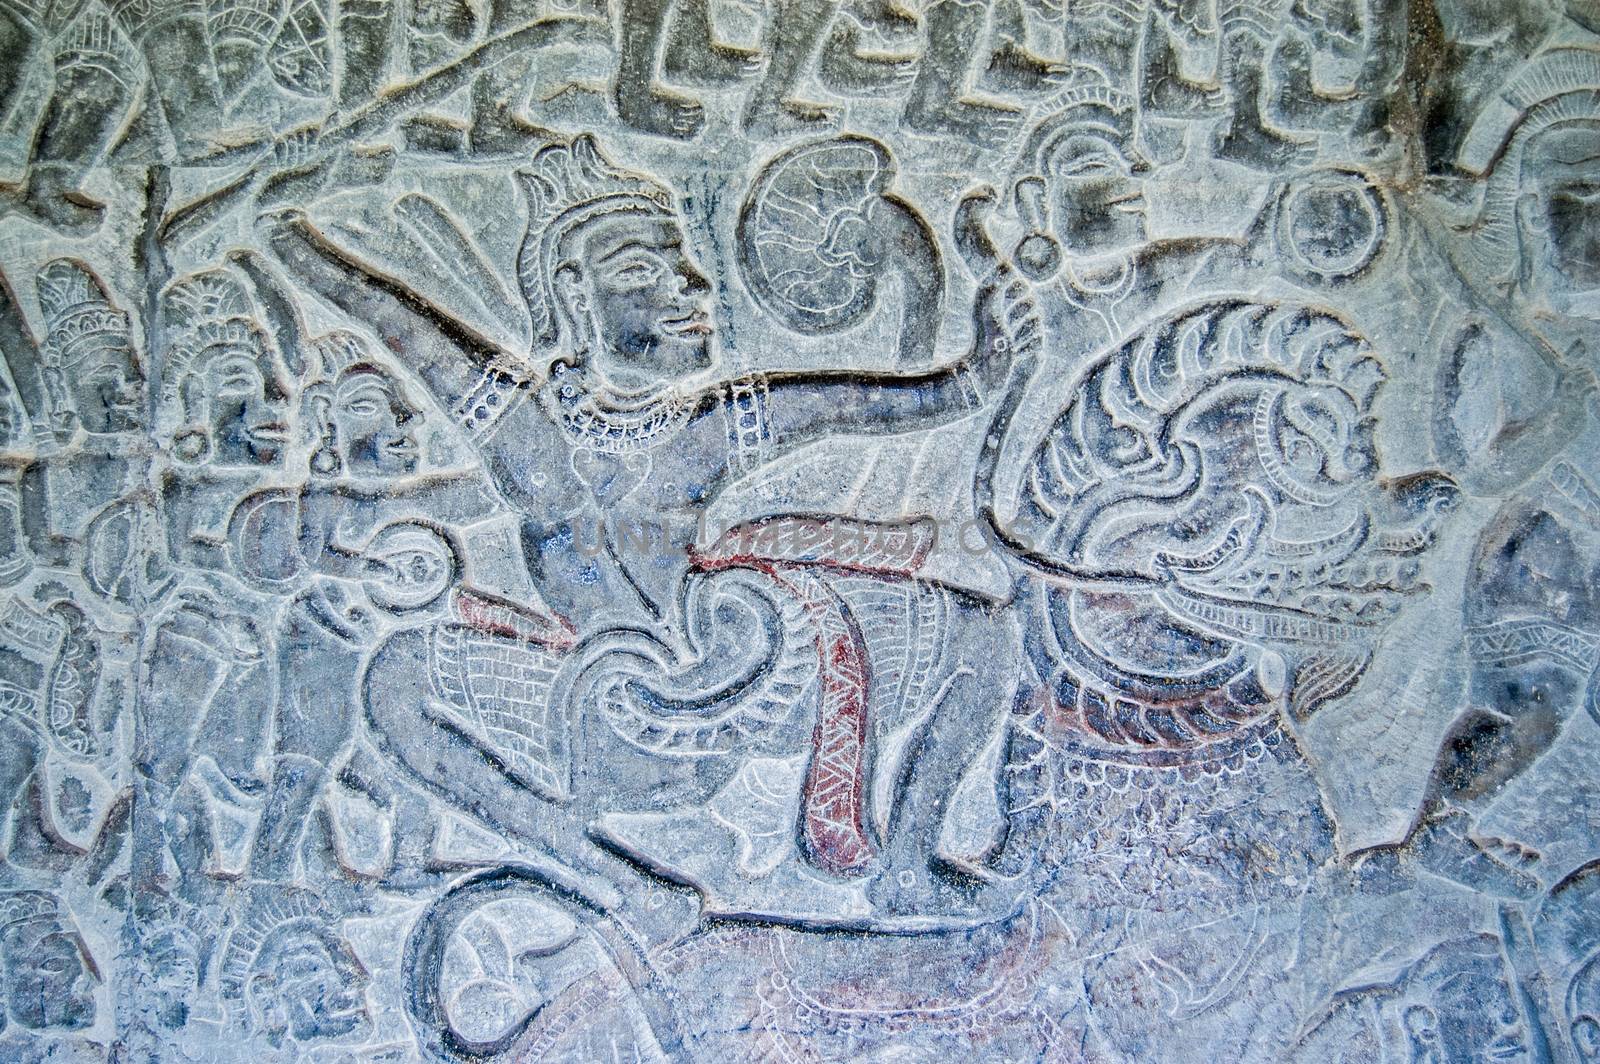 A warrior armed with a sword in battle while riding a Chinese lion. Bas relief carving in the Vishnu and the Asuras gallery, Angkor Wat temple, Siem Reap, Cambodia.